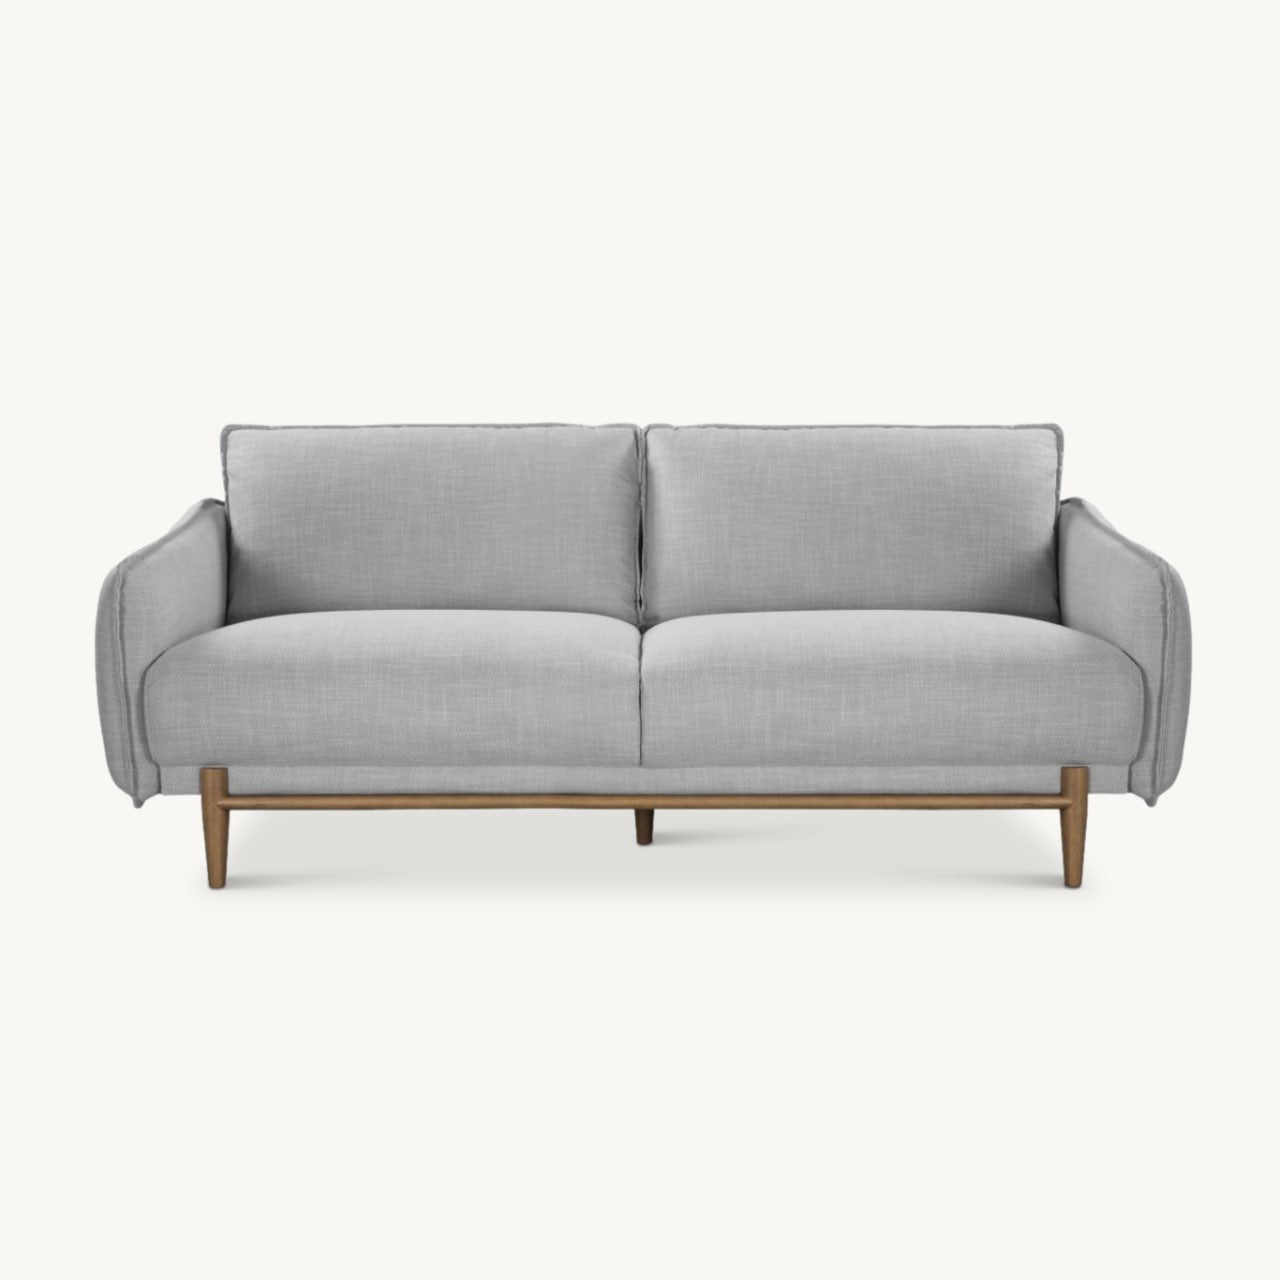 modern comfy 3 seater sofa upholstered in grey linen fabric